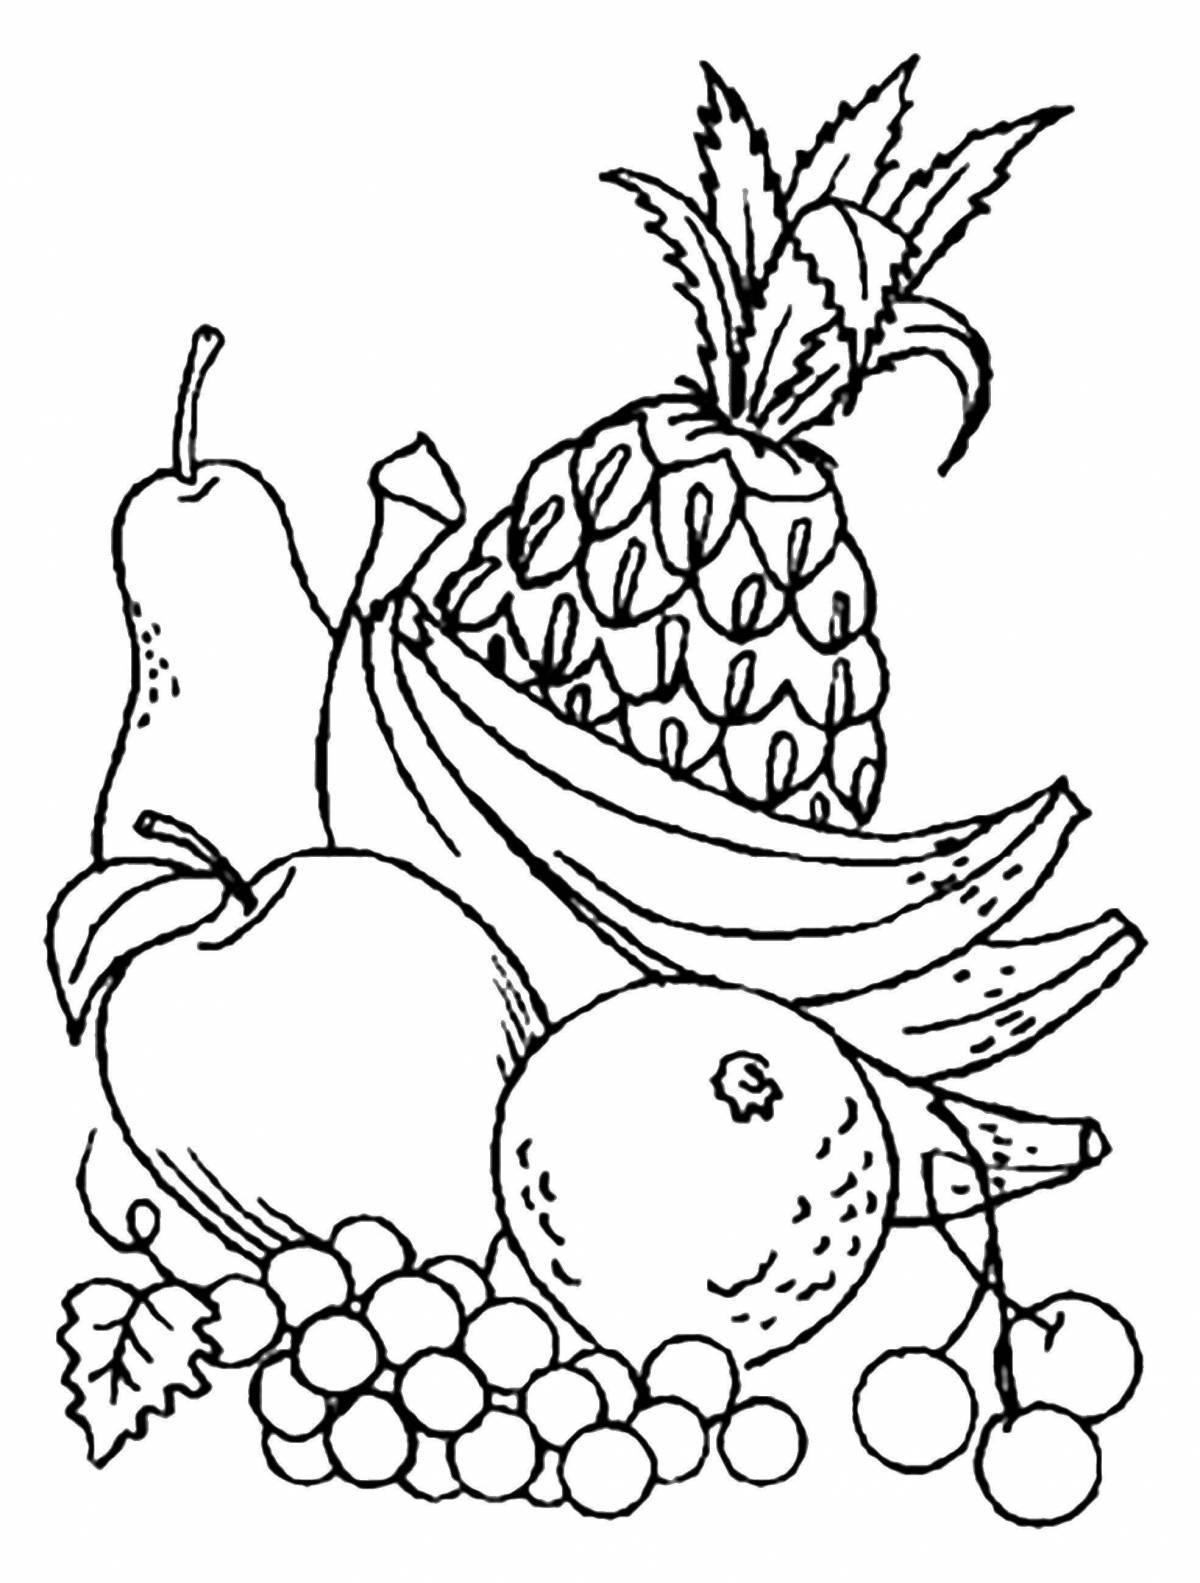 Adorable still life coloring book for kids